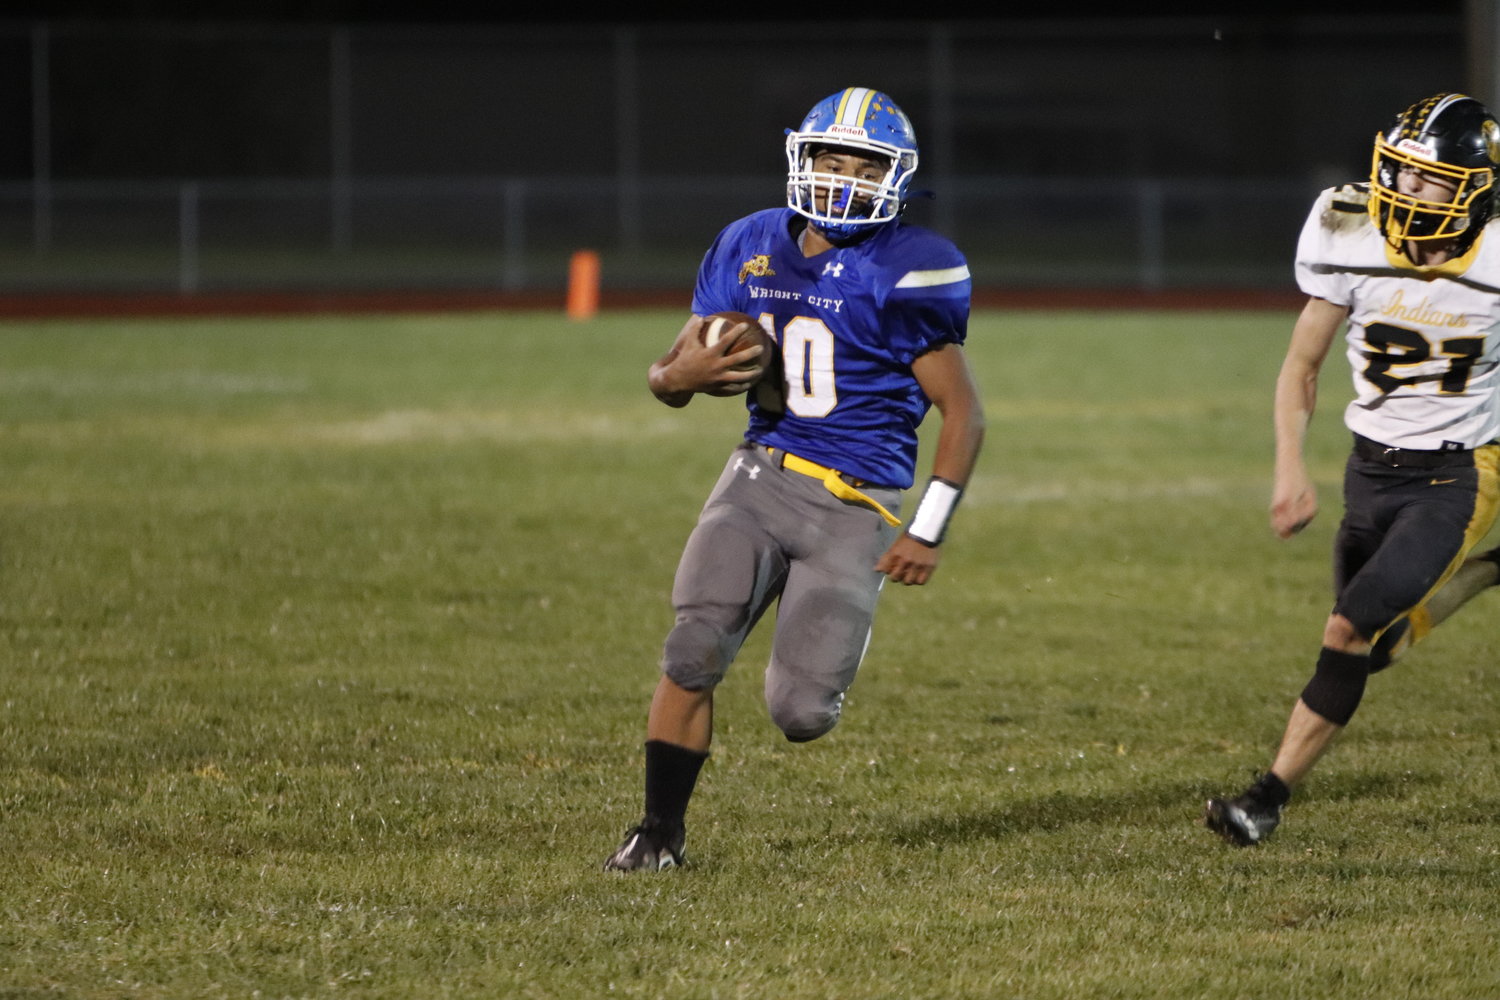 Duan McRoberts carries the ball during the first half of Wright City's win over Van Far. McRoberts rushed for four touchdowns.